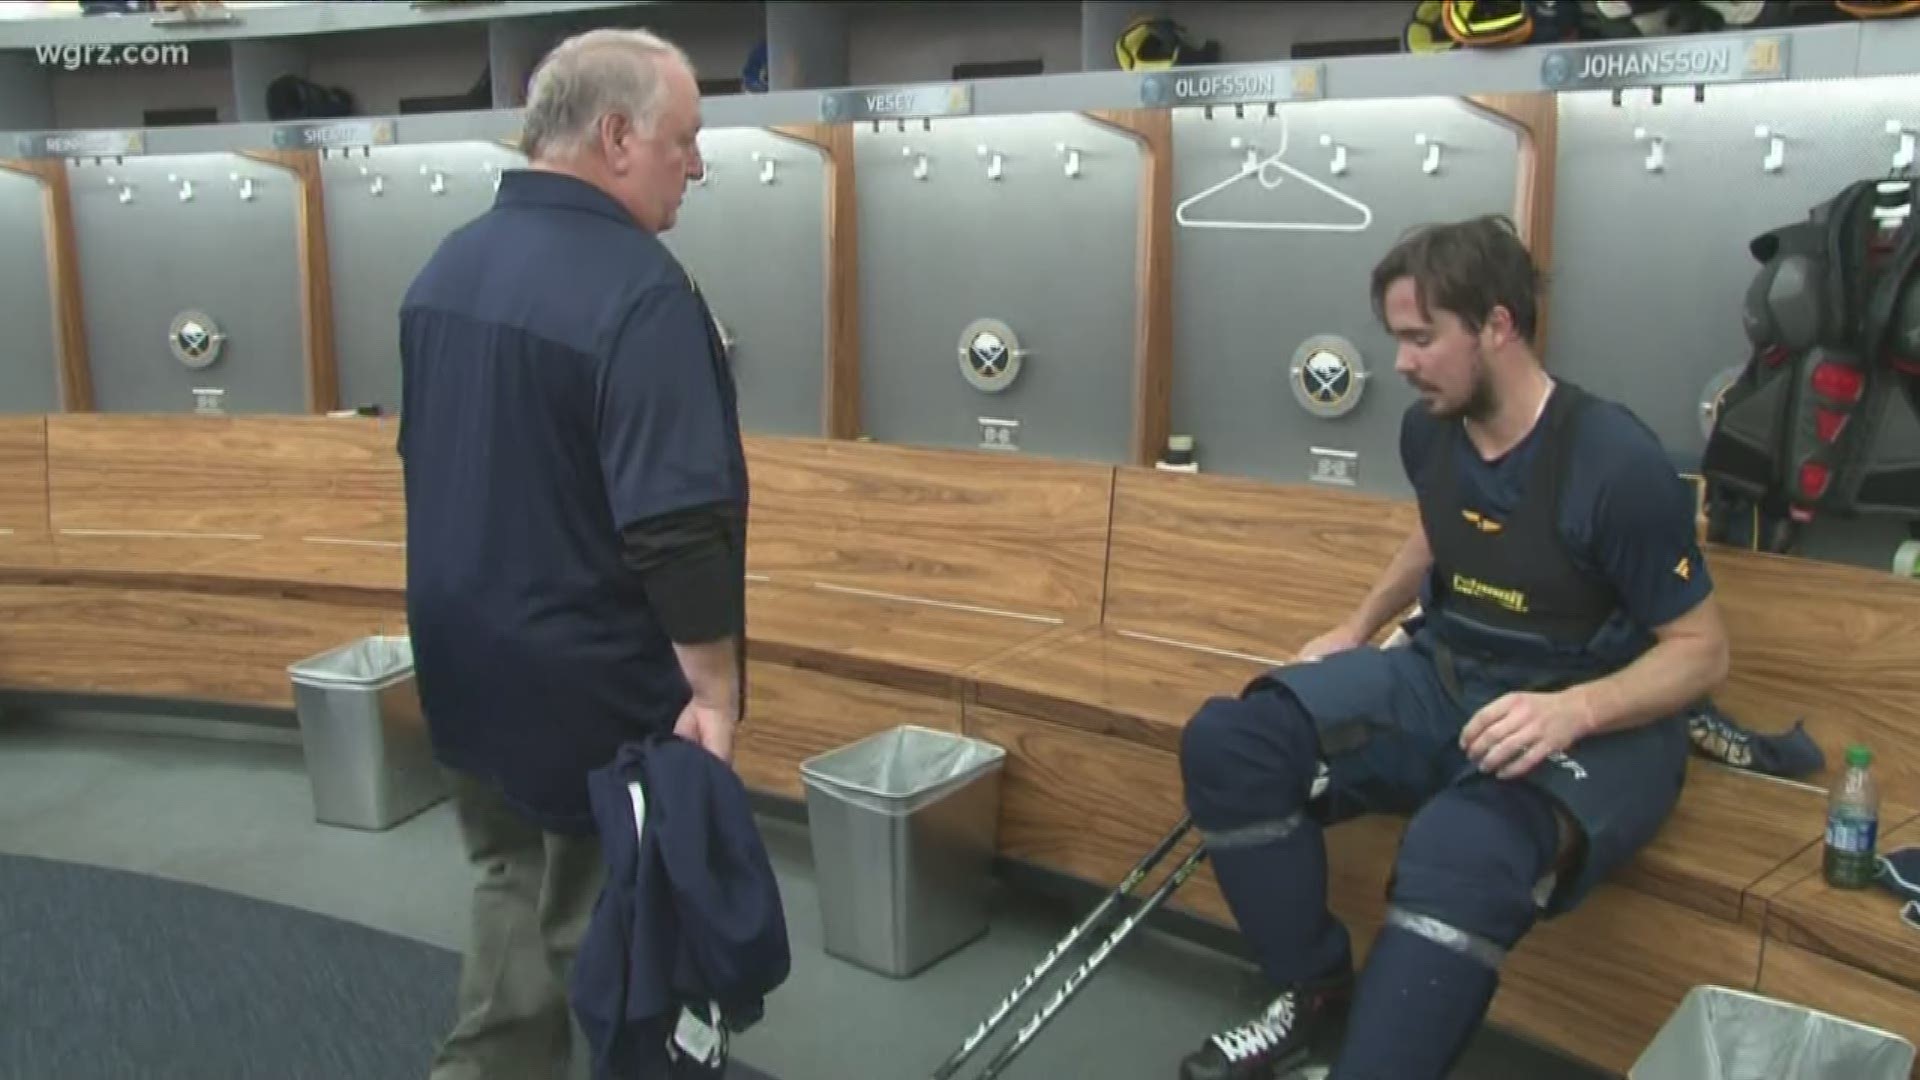 Equipment Manager Rip Simonick has been with the Sabres since day 1